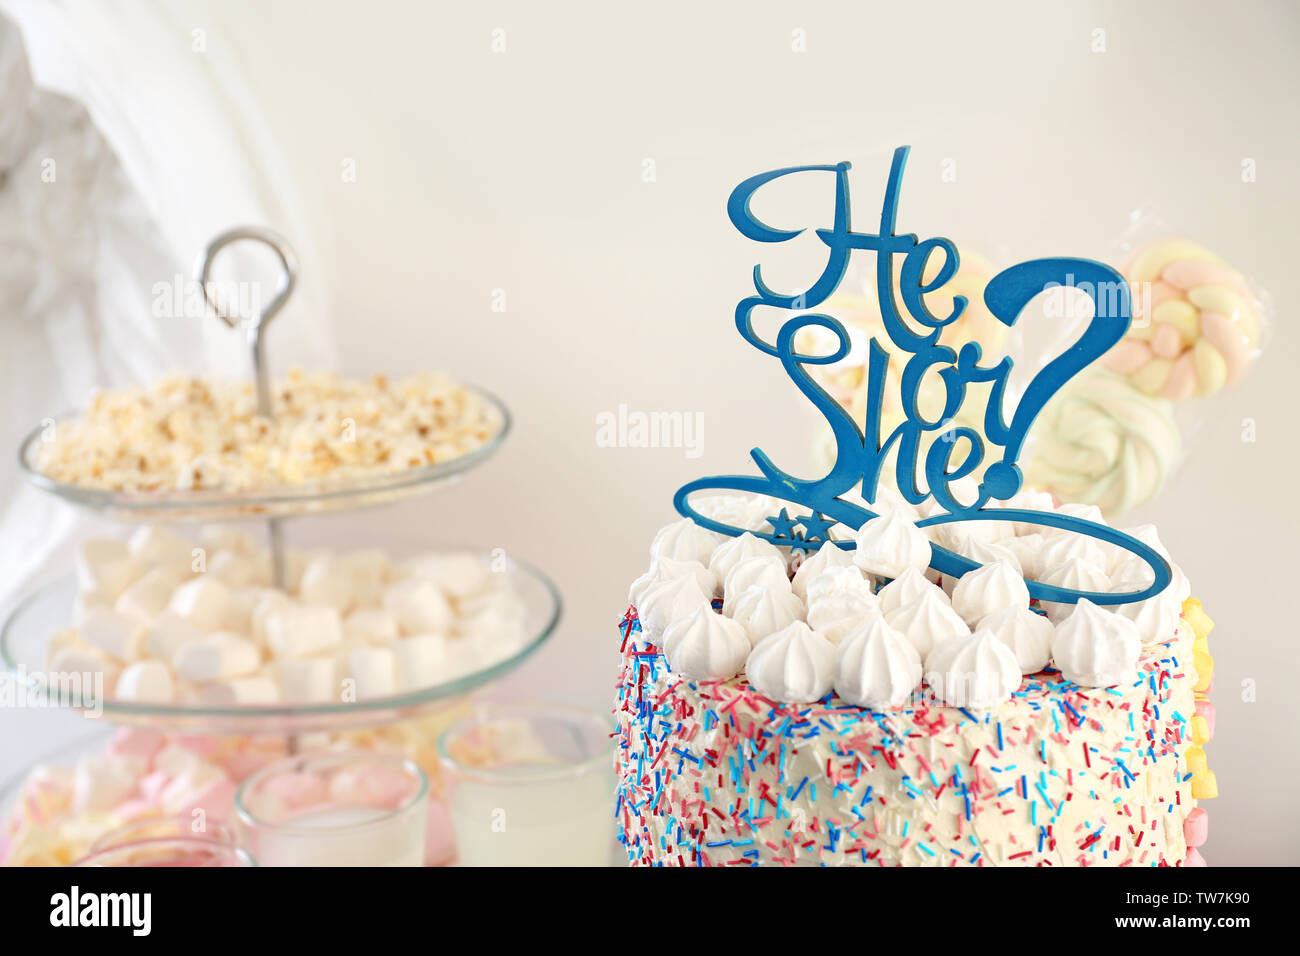 He Or She Cake At Baby Shower Party Stock Photo Alamy